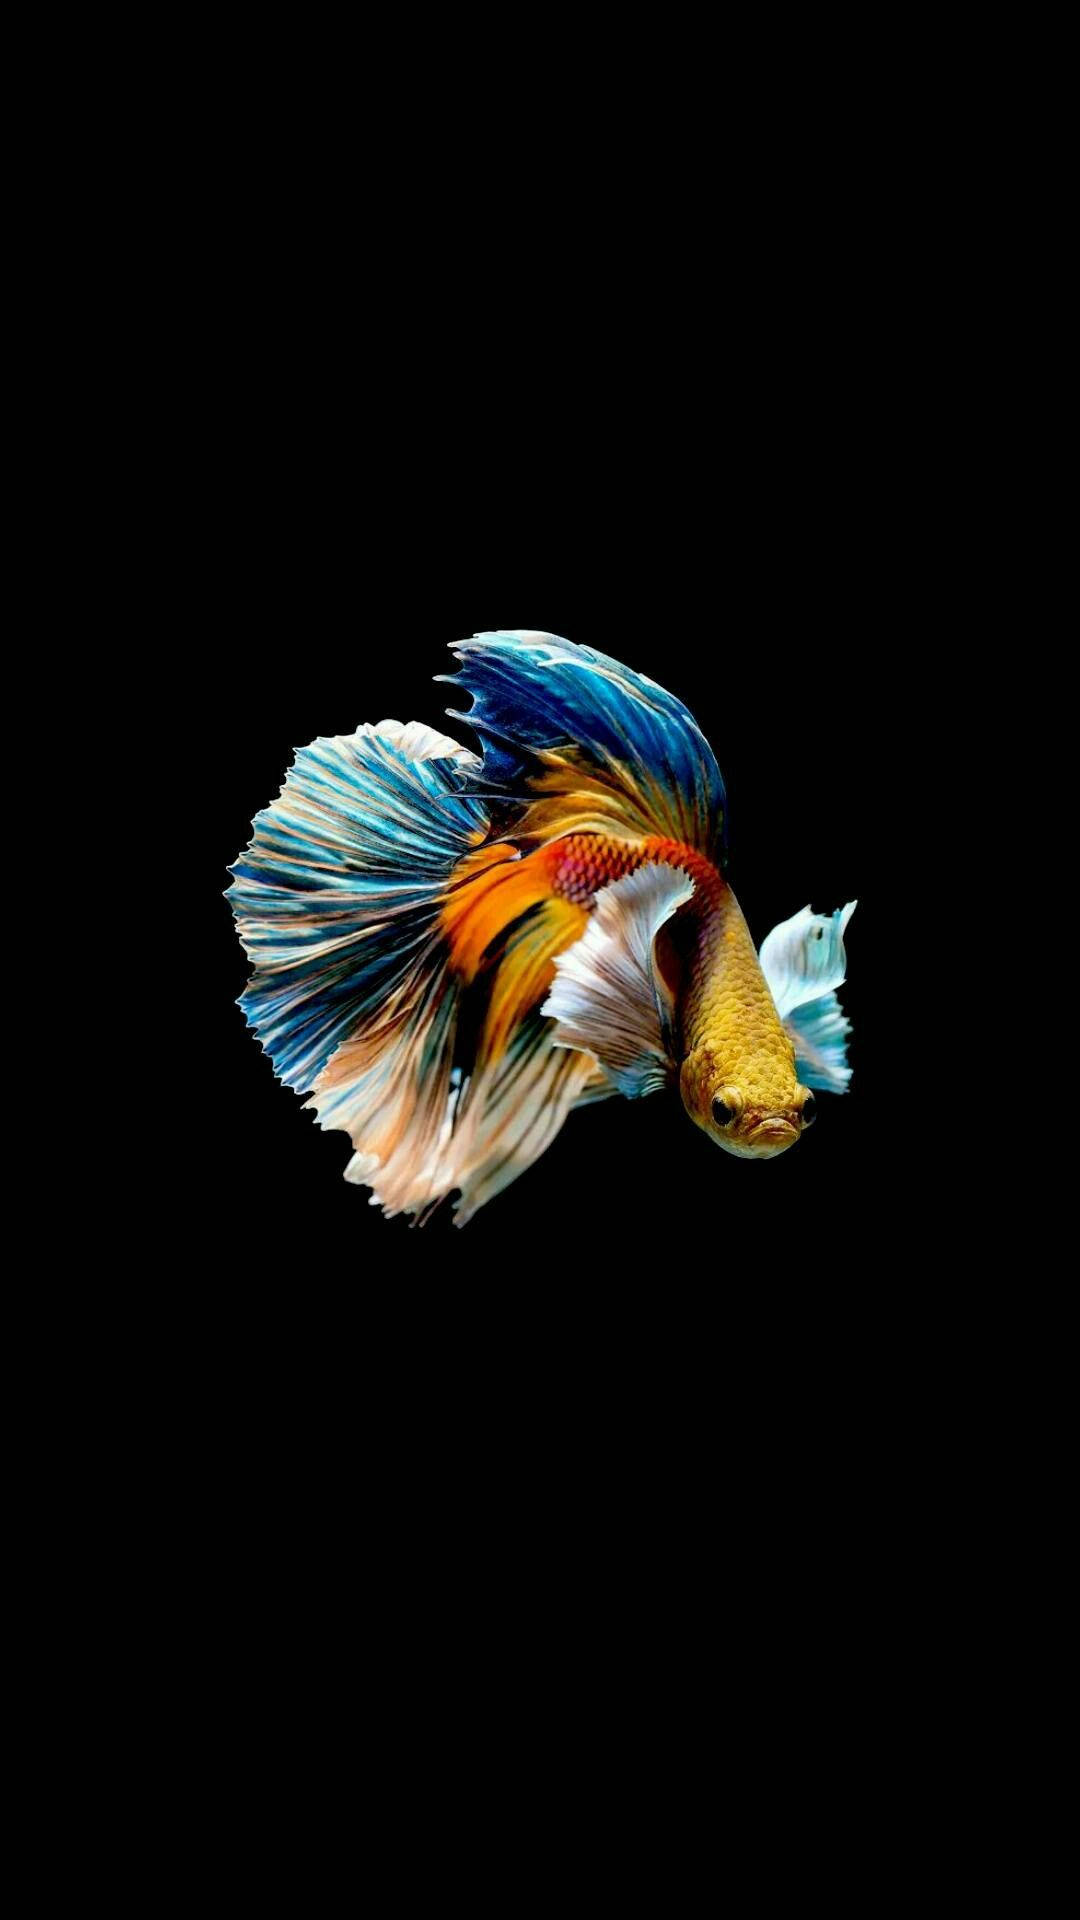 Apple Releases Clownfish Wallpaper Used to Launch Original iPhone, Download  in Full Resolution - iClarified